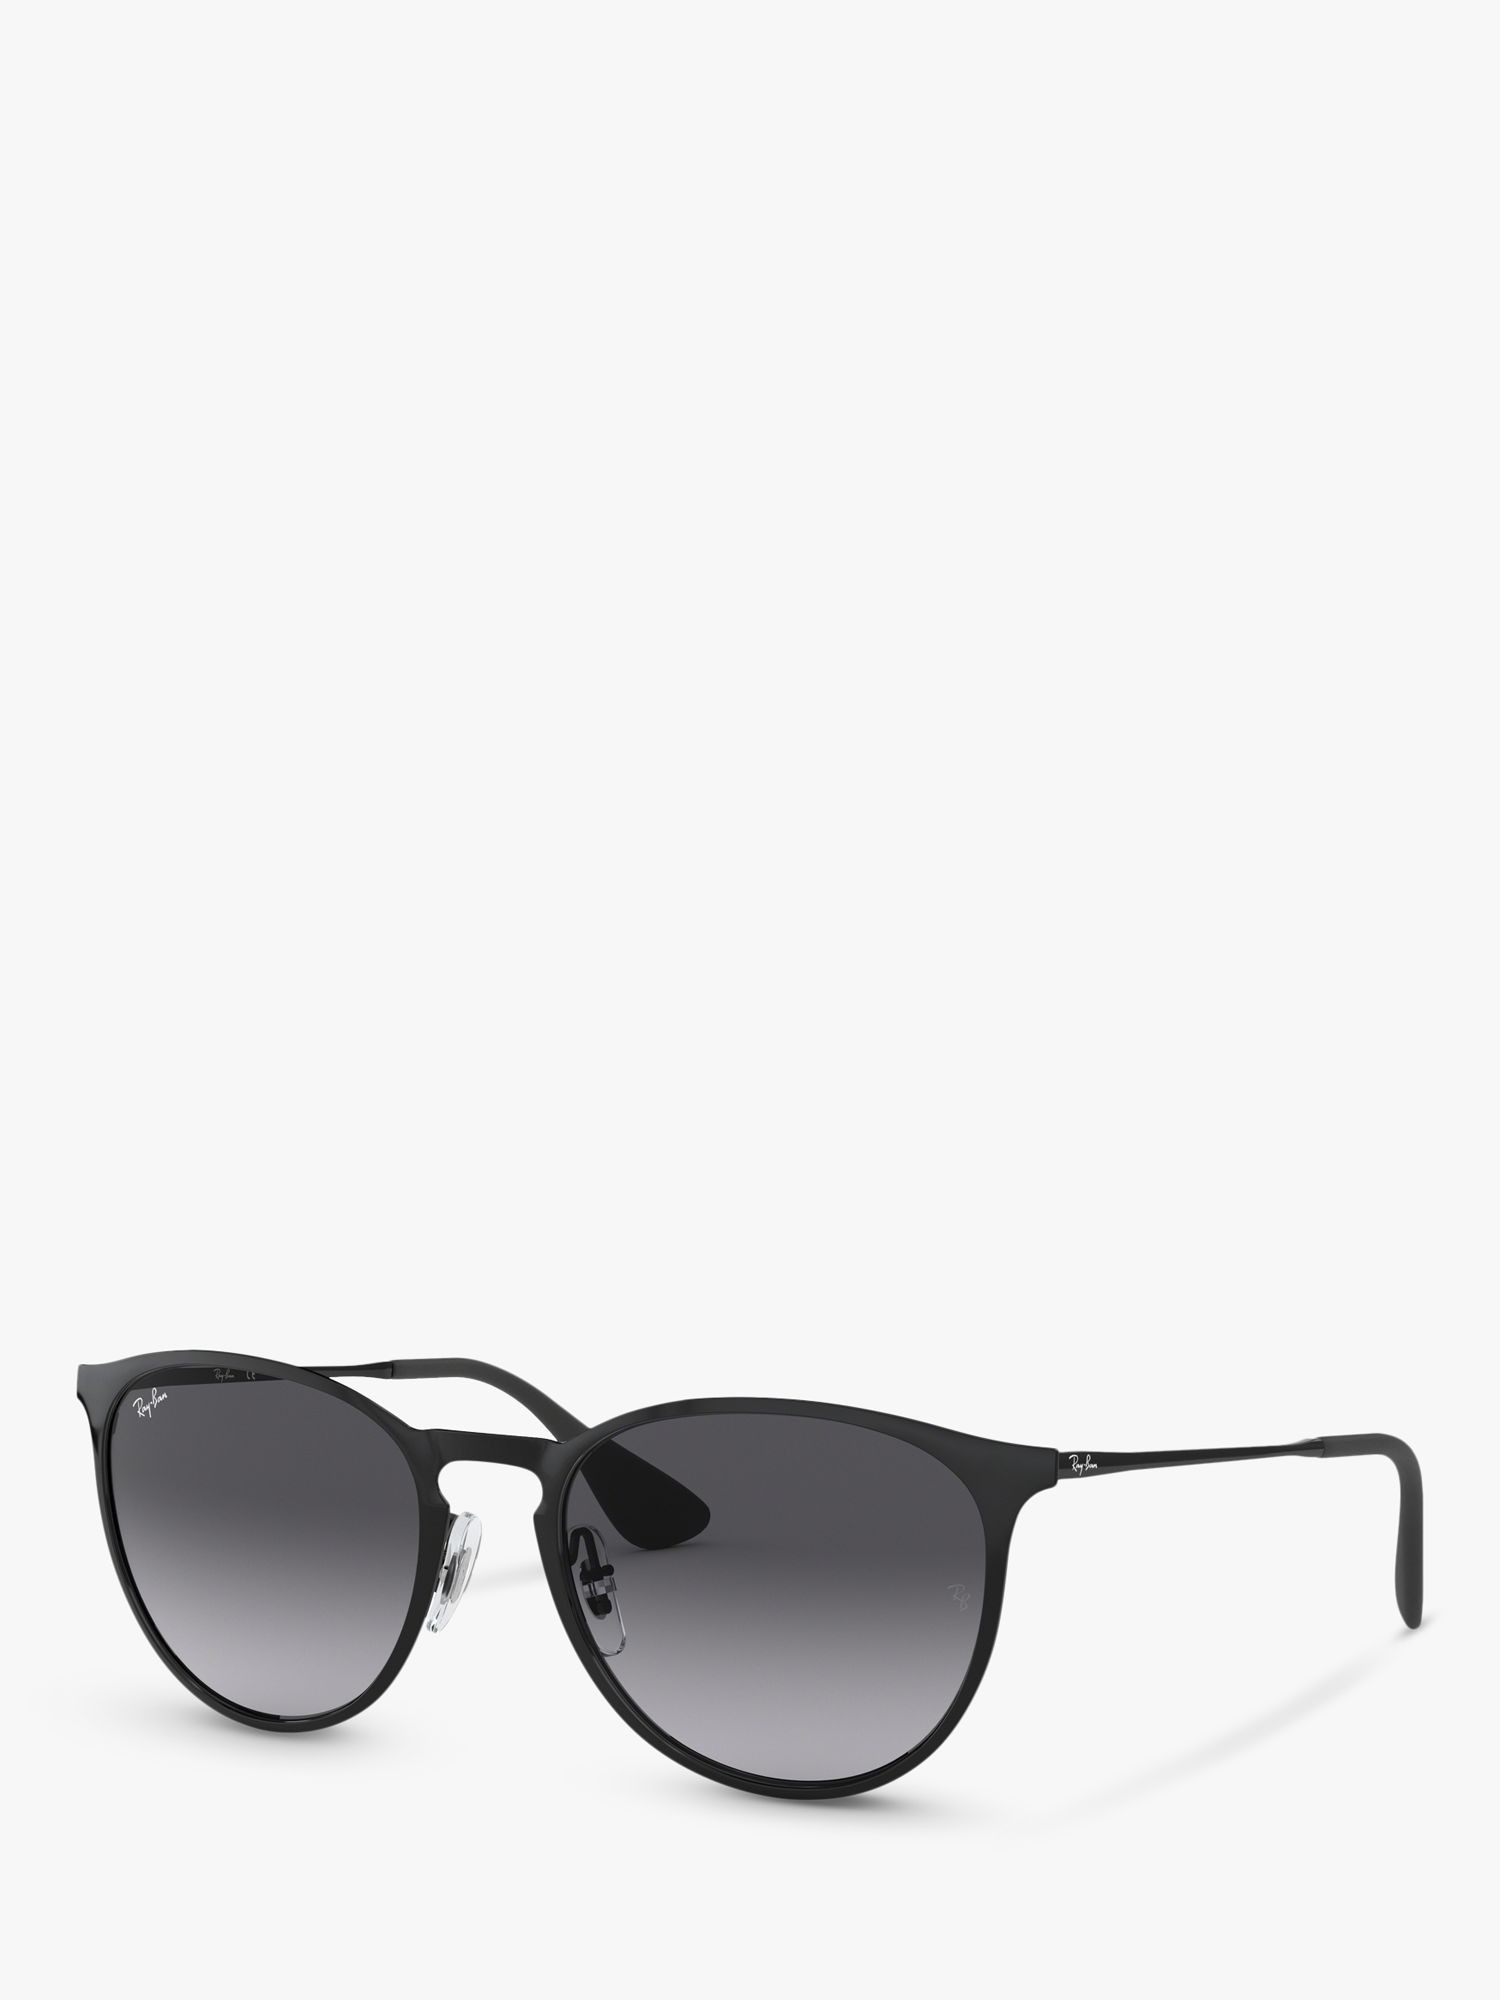 Ray-Ban RB3539 Women's Erika Oval 